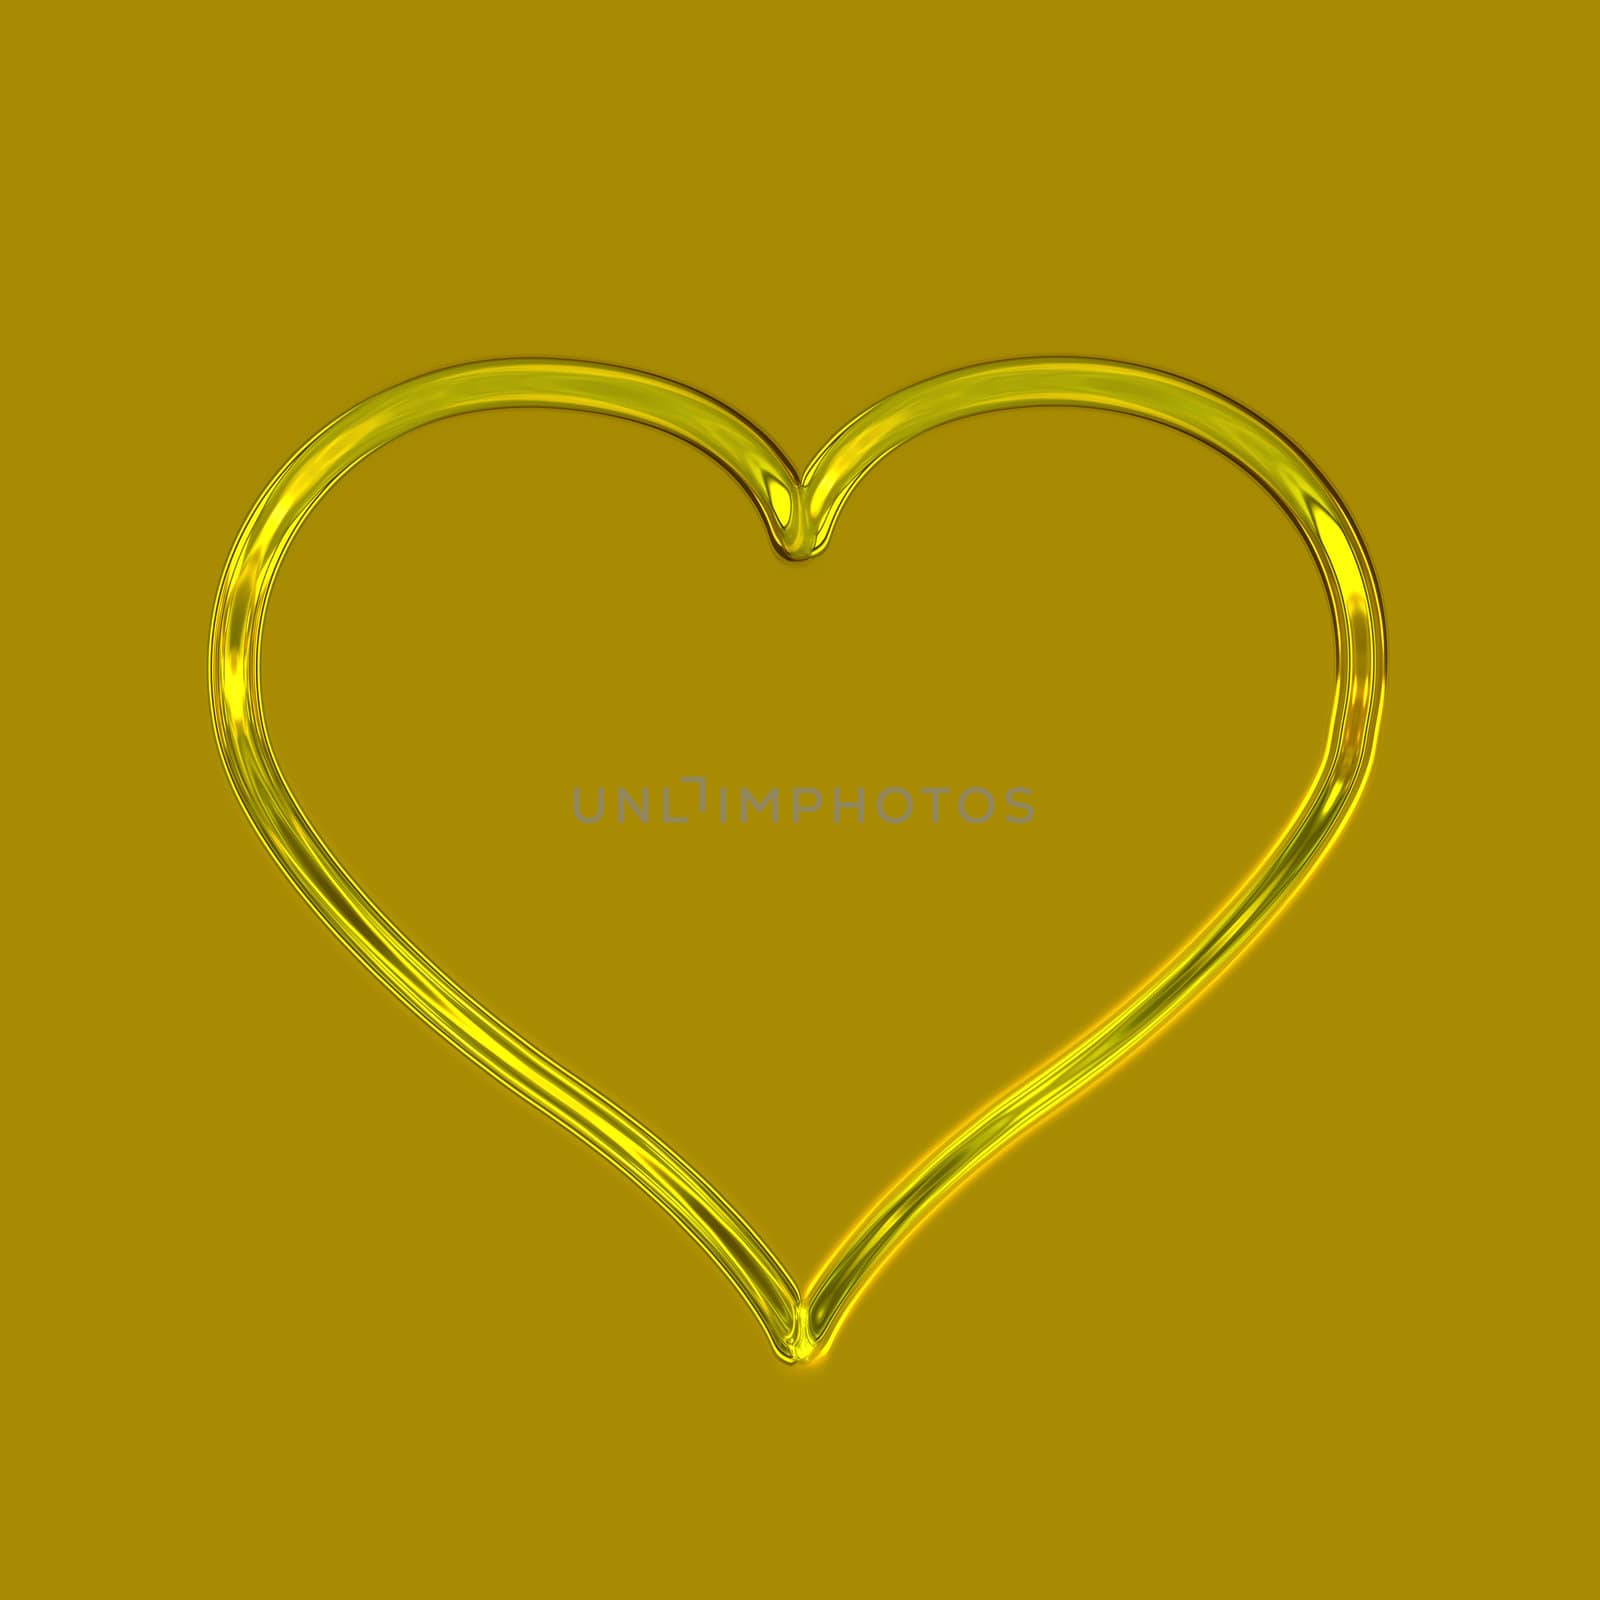 one glossy golden heart on a golden background